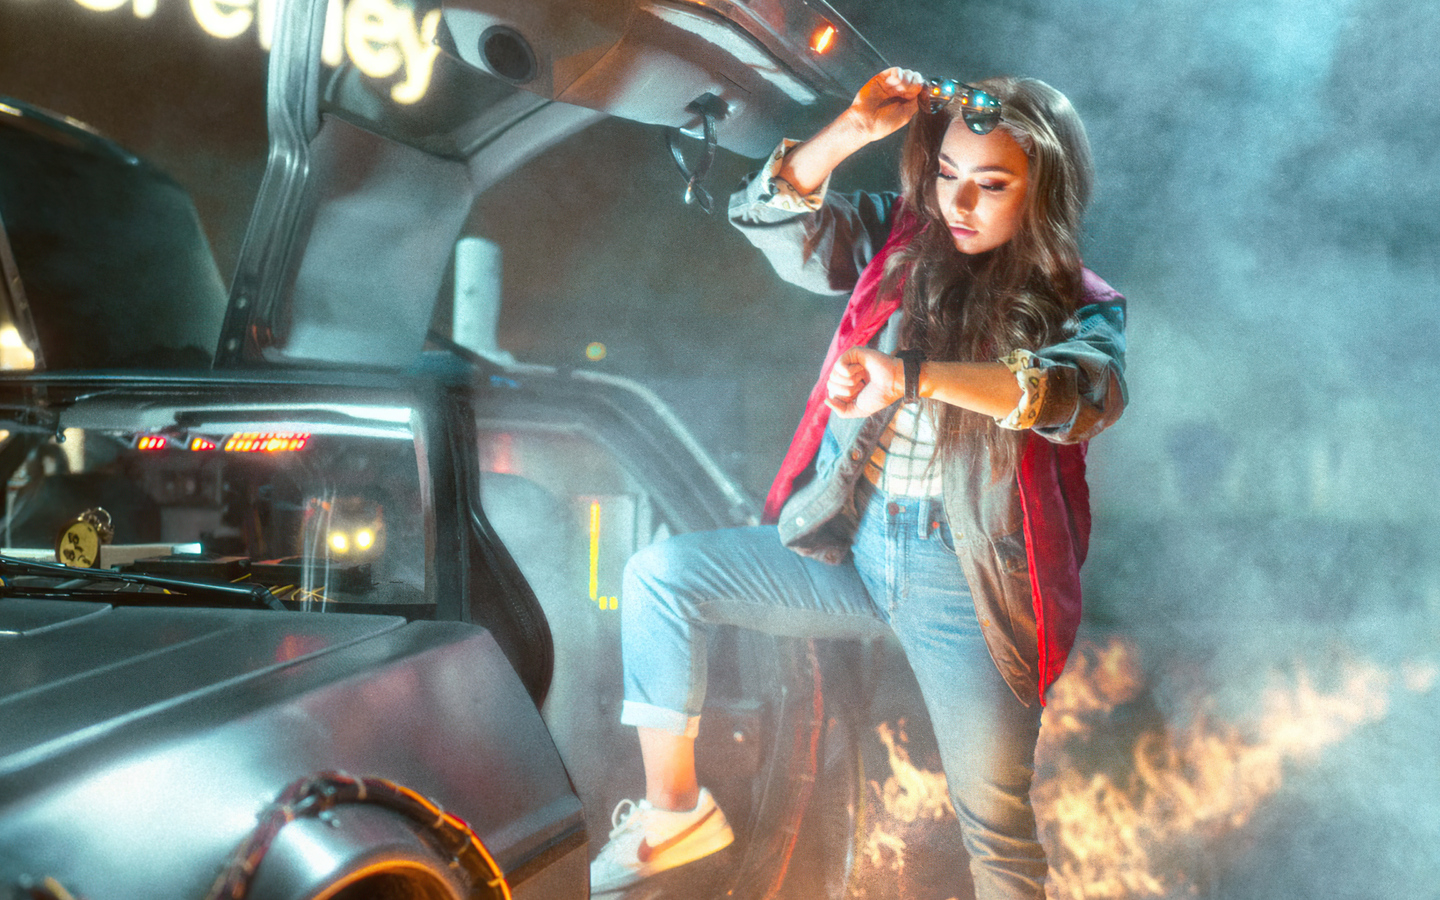 marty-back-to-the-future-cosplay-5k-ob.jpg